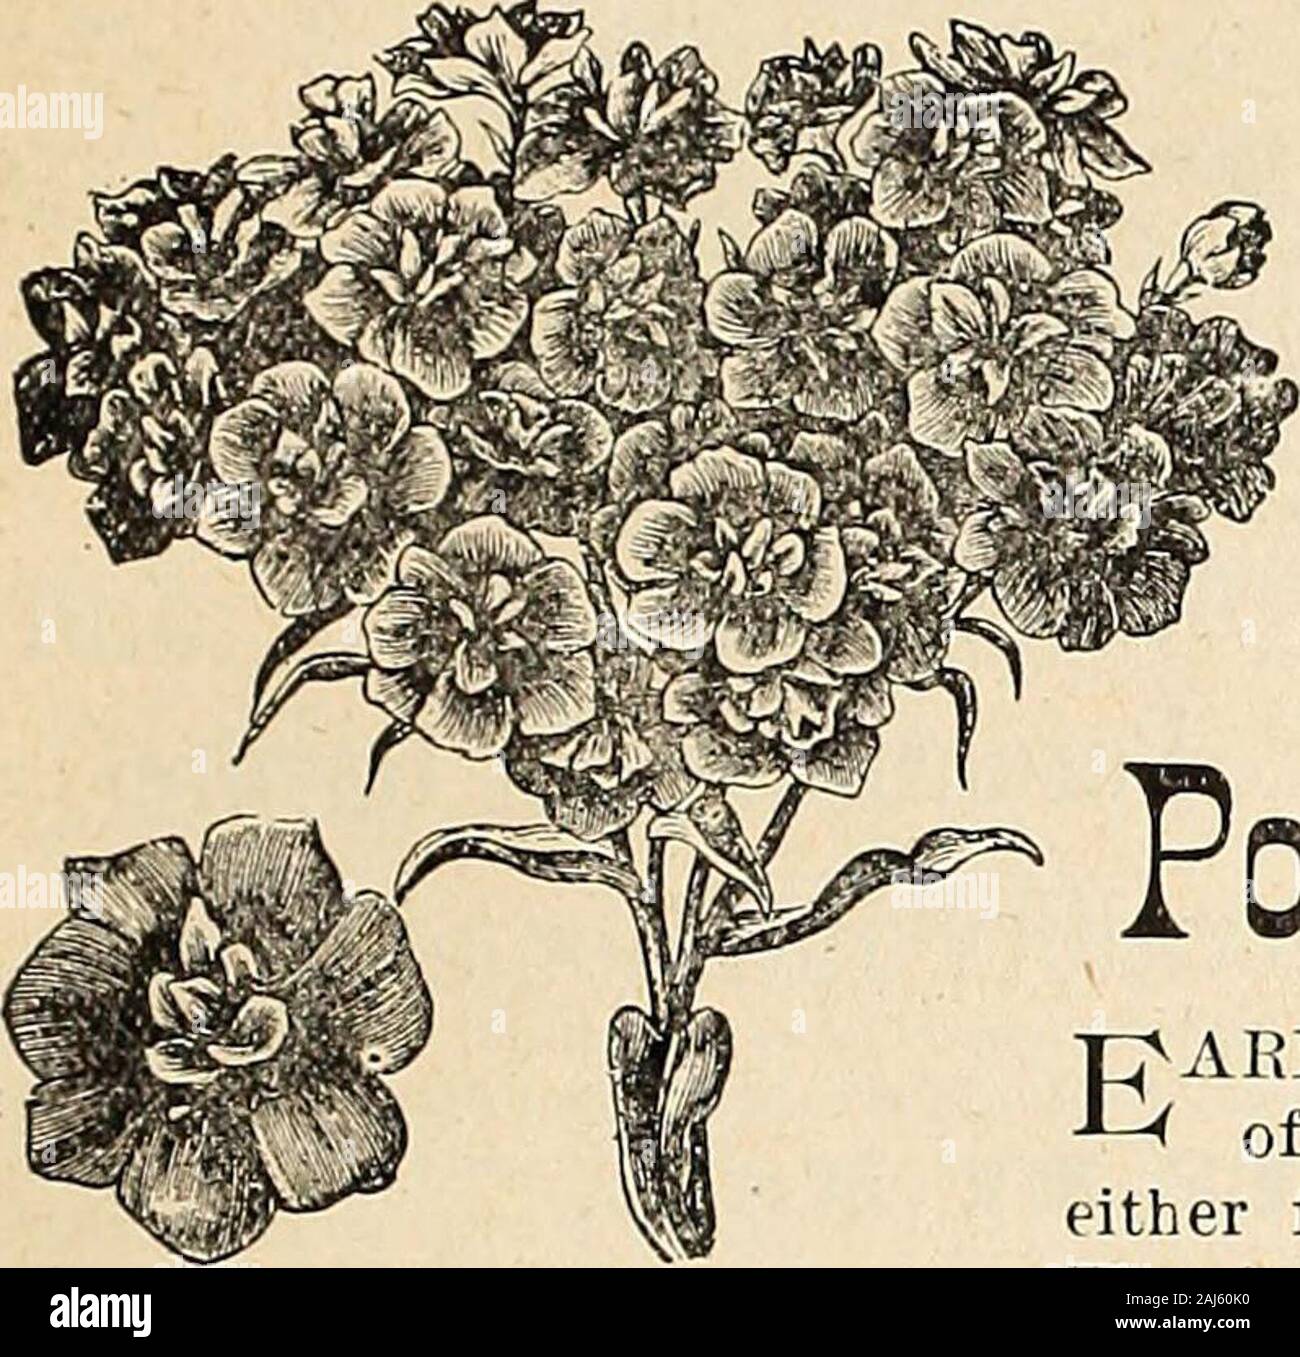 Horitucultural guide : spring 1892 . NEW HARDY HYBRID PRmBOSE. Qjrri(^ Bros/ J^ortieultural Quide.- 37 PHLOX DRUMMONDI SEMIPLENO. fl New and novel strain of semi-double Phlox containing many newand beautiful tints, such as pale pink, yellow, rose, marbled roseand violet purple, besides the usual colors—white, scarlet, purple, etc., making a valuable ad-dition to the numerousvarieties already in cultiva-tion. All lovers of this beauti-ful annual must necessari-ly hail this new strain withdelight. ? Packet, 25 cents.. Polyanthus* Stock Photo